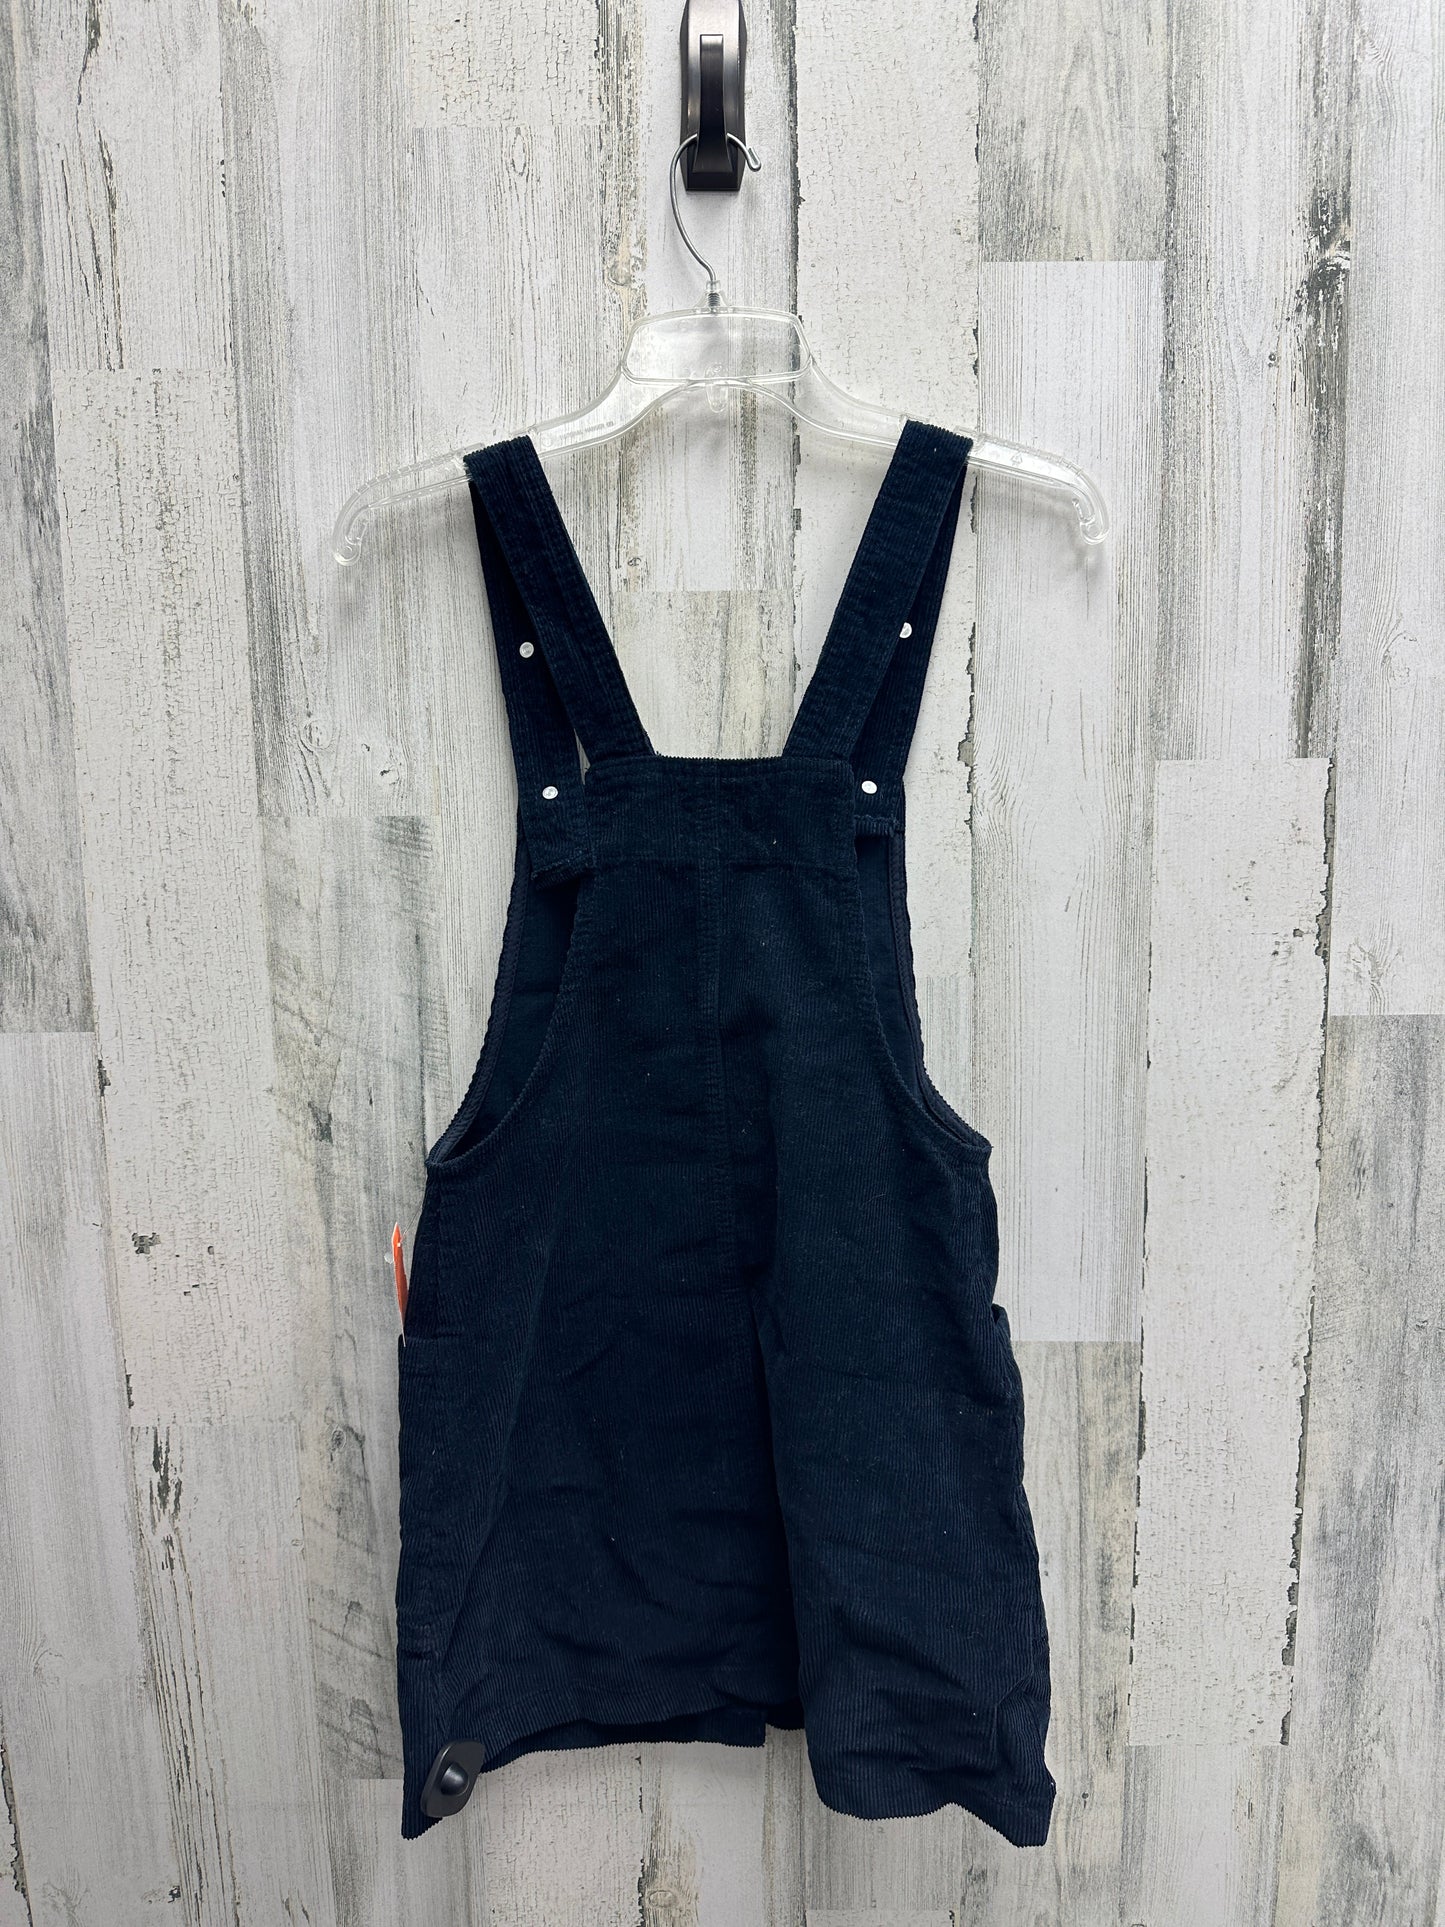 Overalls By Urban Outfitters  Size: Xs